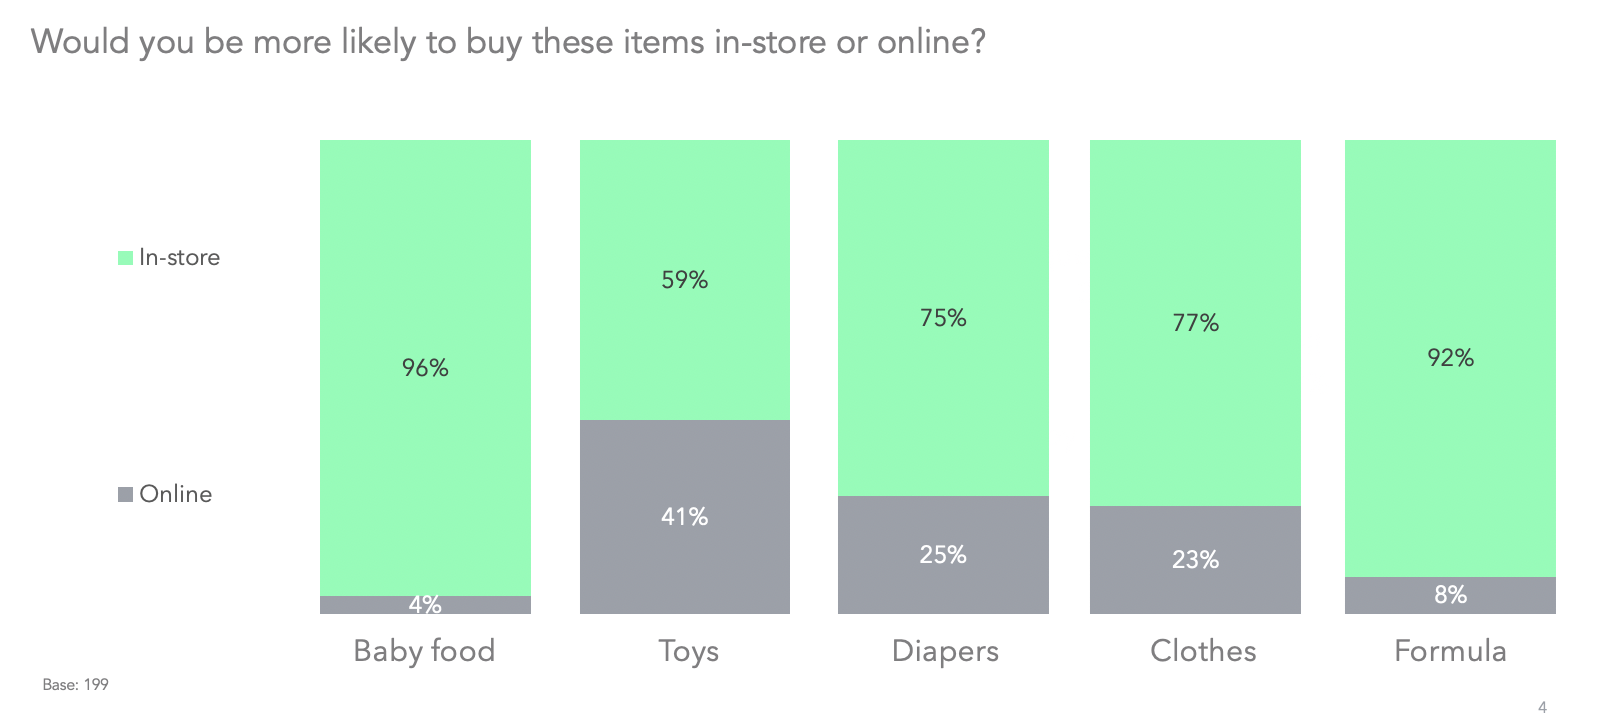 Would you be more likely to buy these items in-store or online?